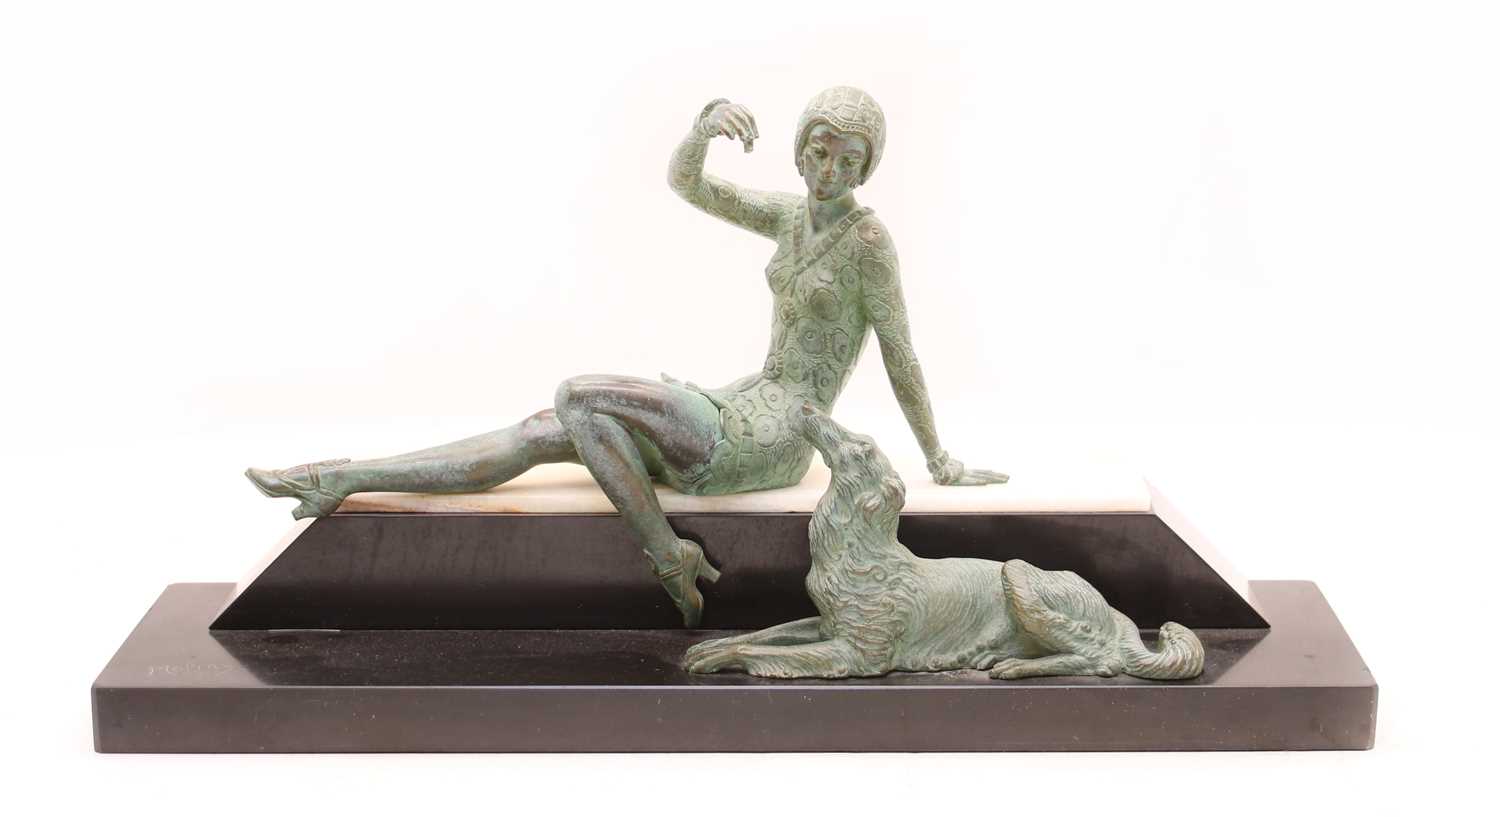 Lot 193 - An Art Deco style bronzed figure of a woman and a dog